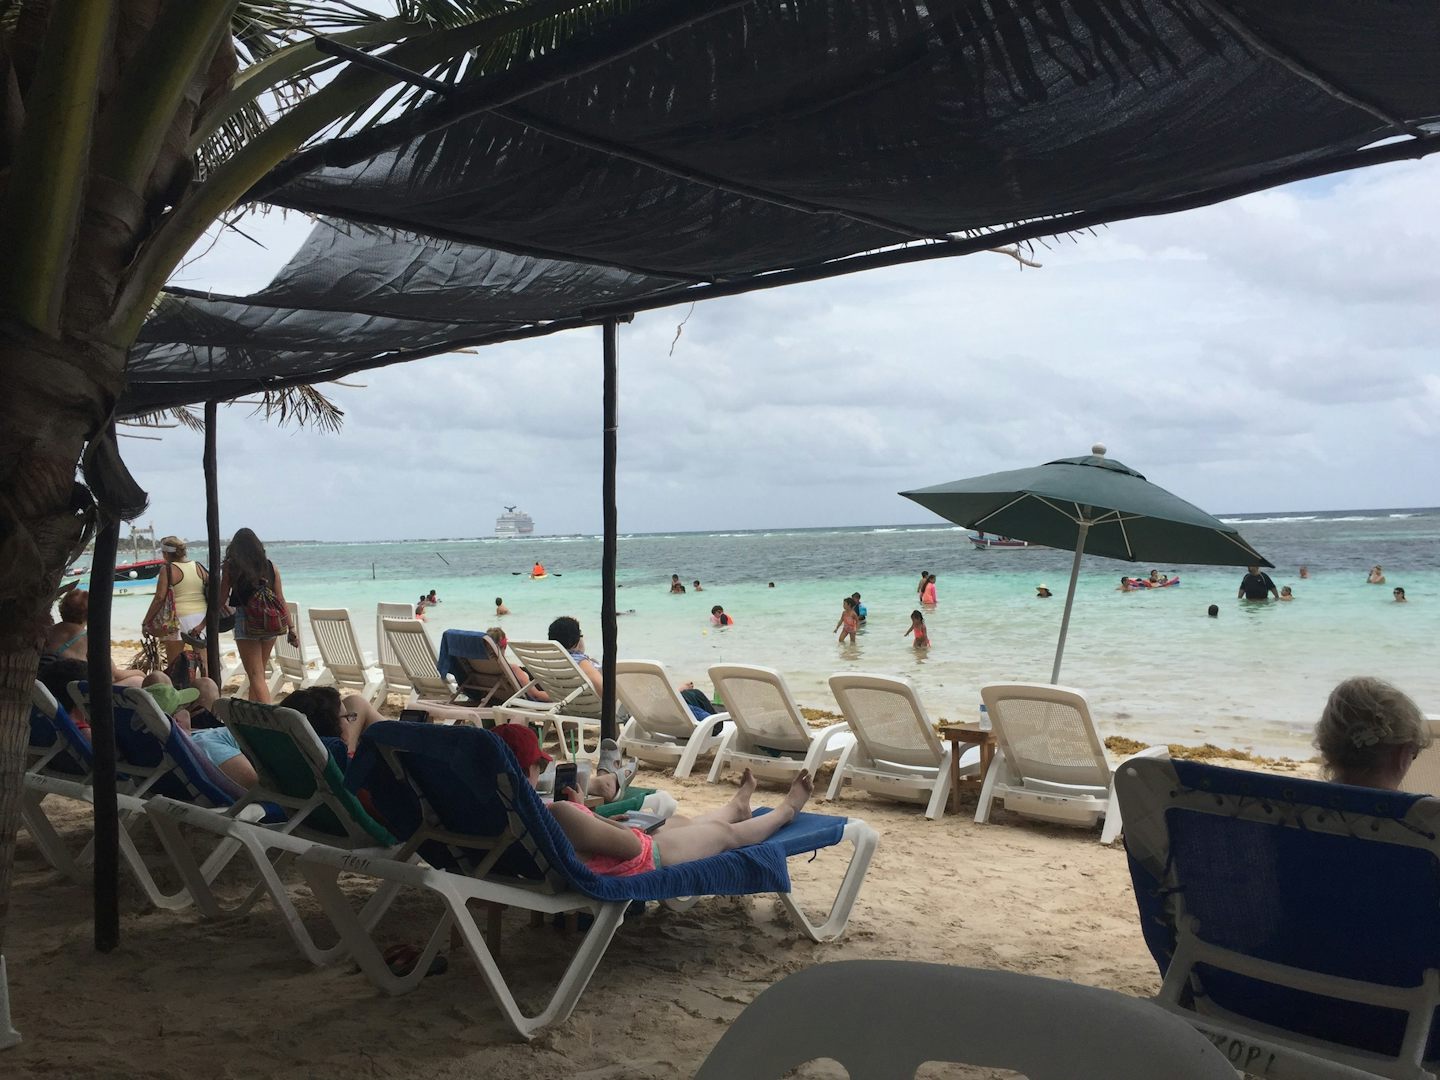 In Costa Maya we took a cab to Tropicante- restaurant on the beach. Had a g